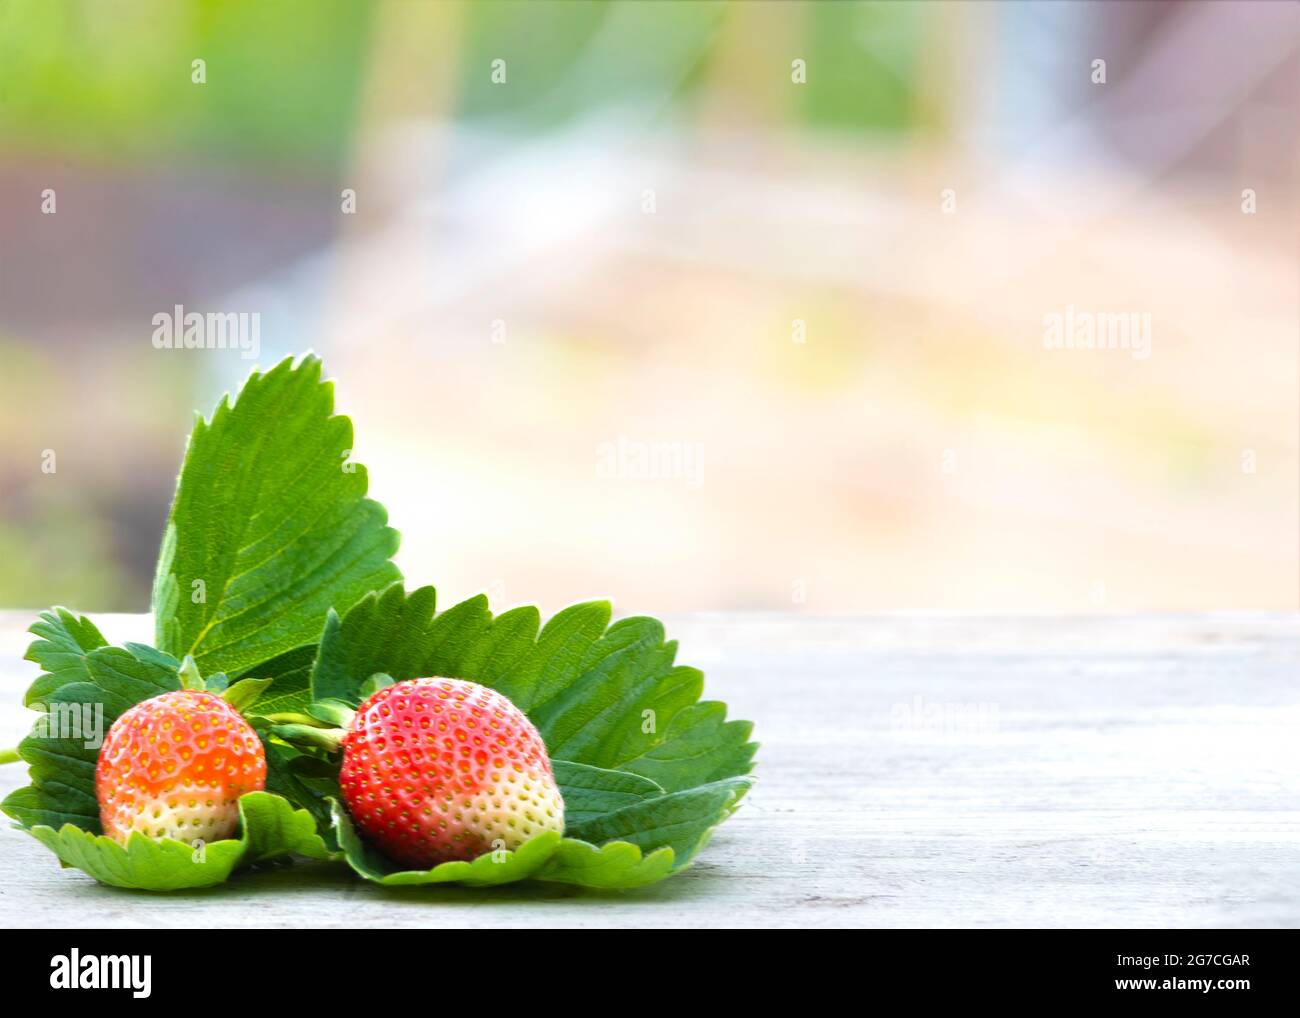 Strawberries freshly picked from the garden, allotment or farm. Organic fruit placed on the table,  blurred scenic garden background to aid copy space Stock Photo